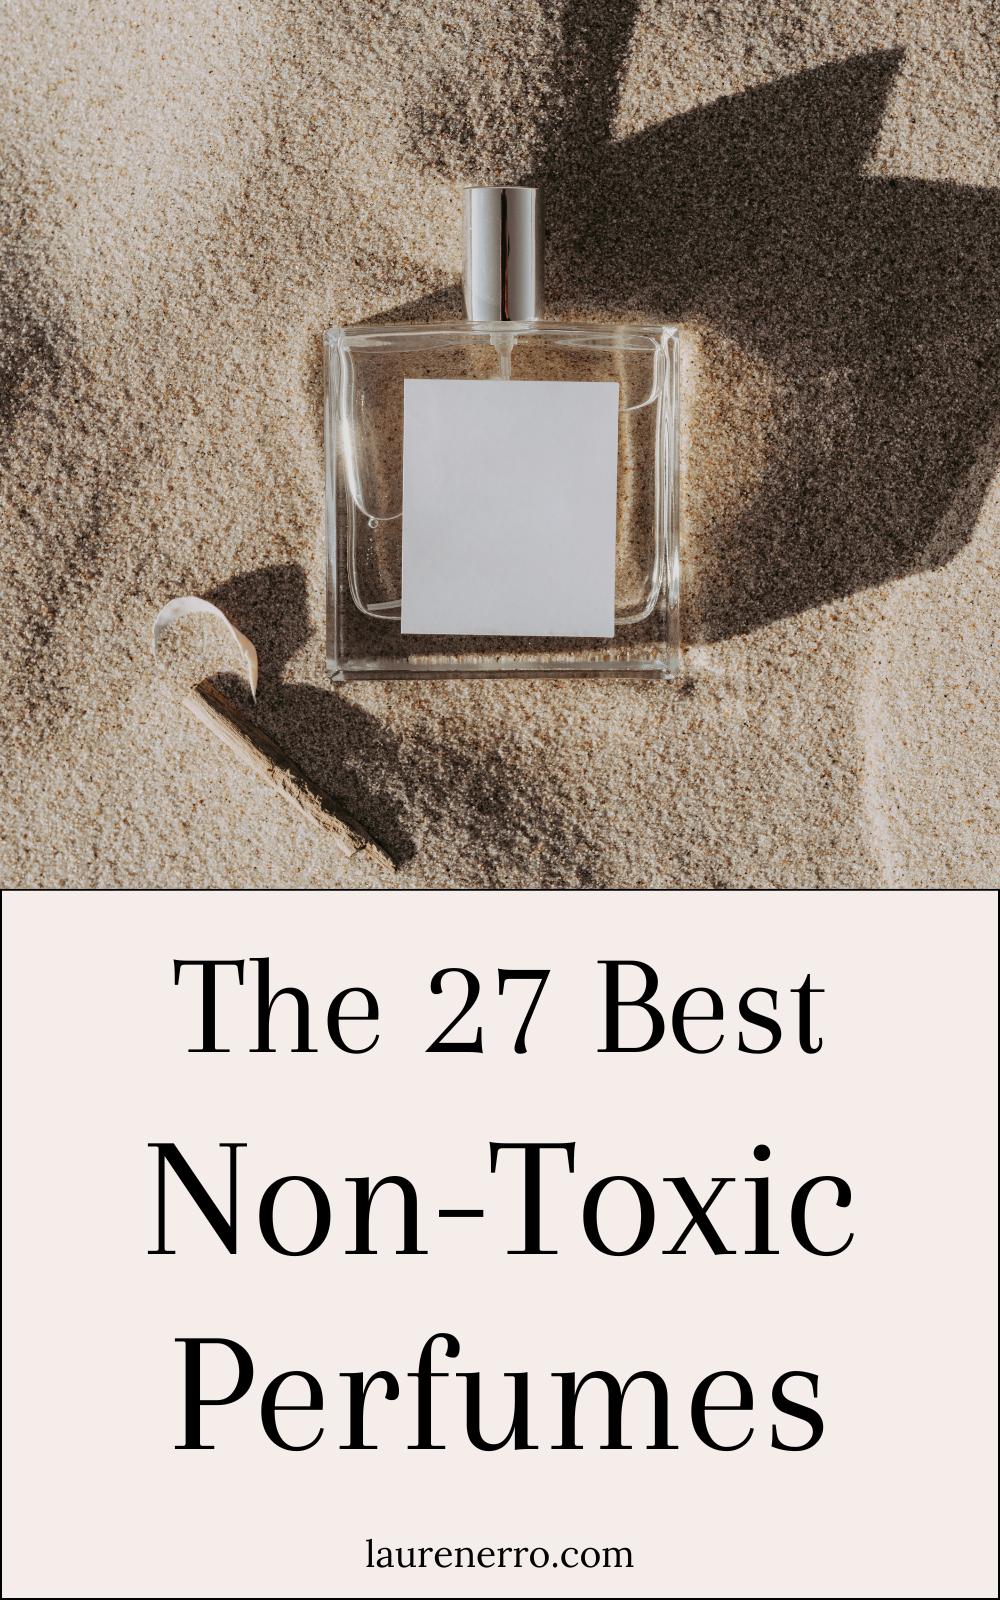 27 Best Non-Toxic Perfumes That Are Clean and Natural